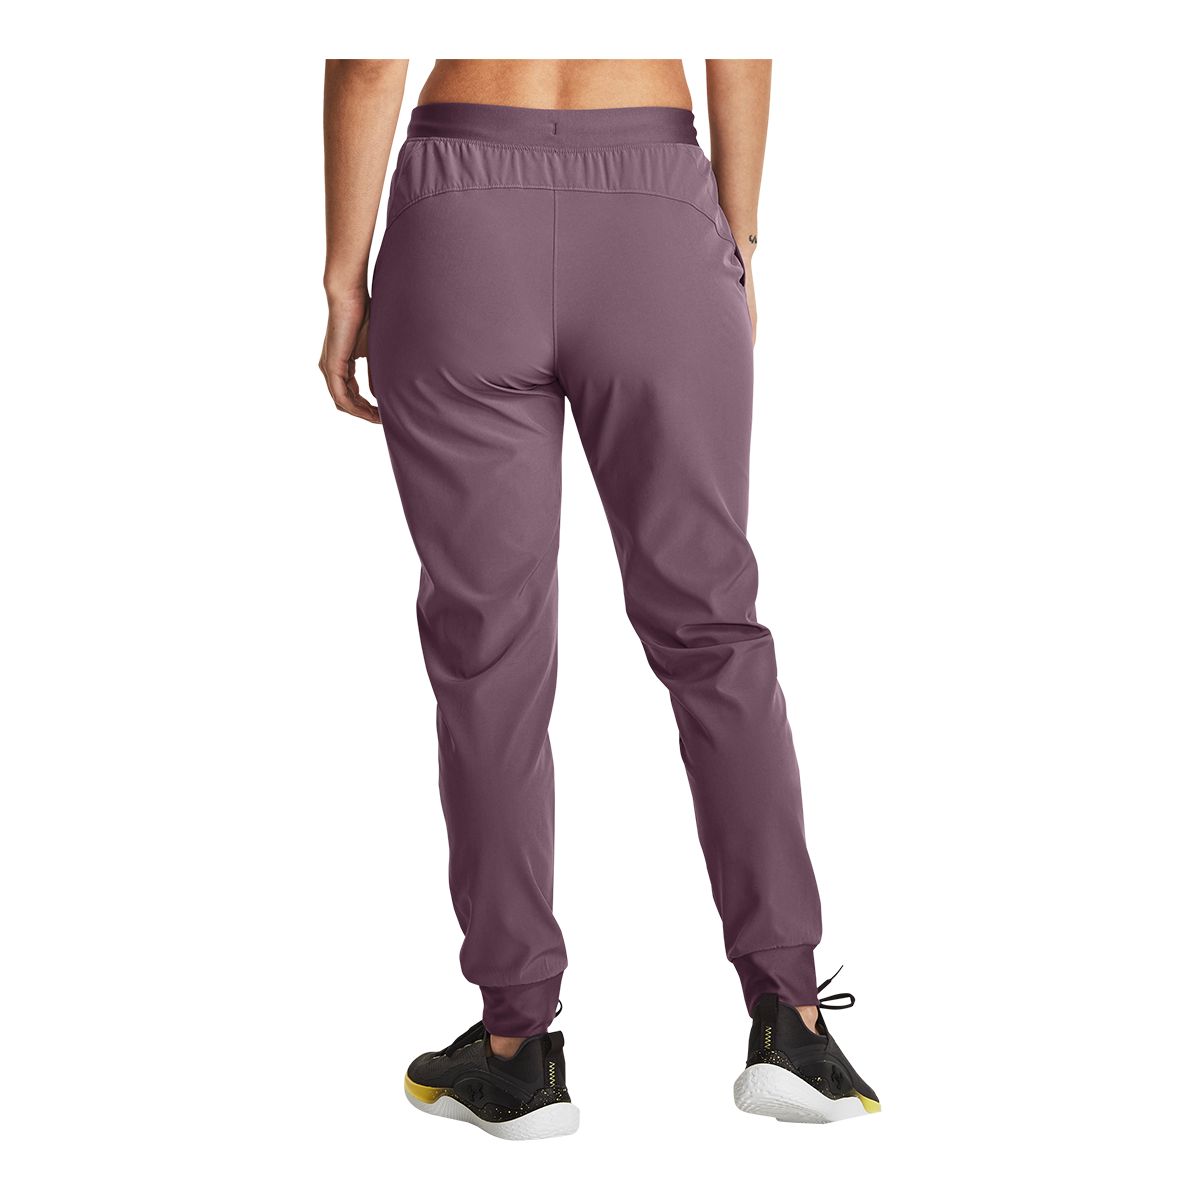 Womens sports pants Under Armour ARMOUR SPORT WOVEN PANT W black